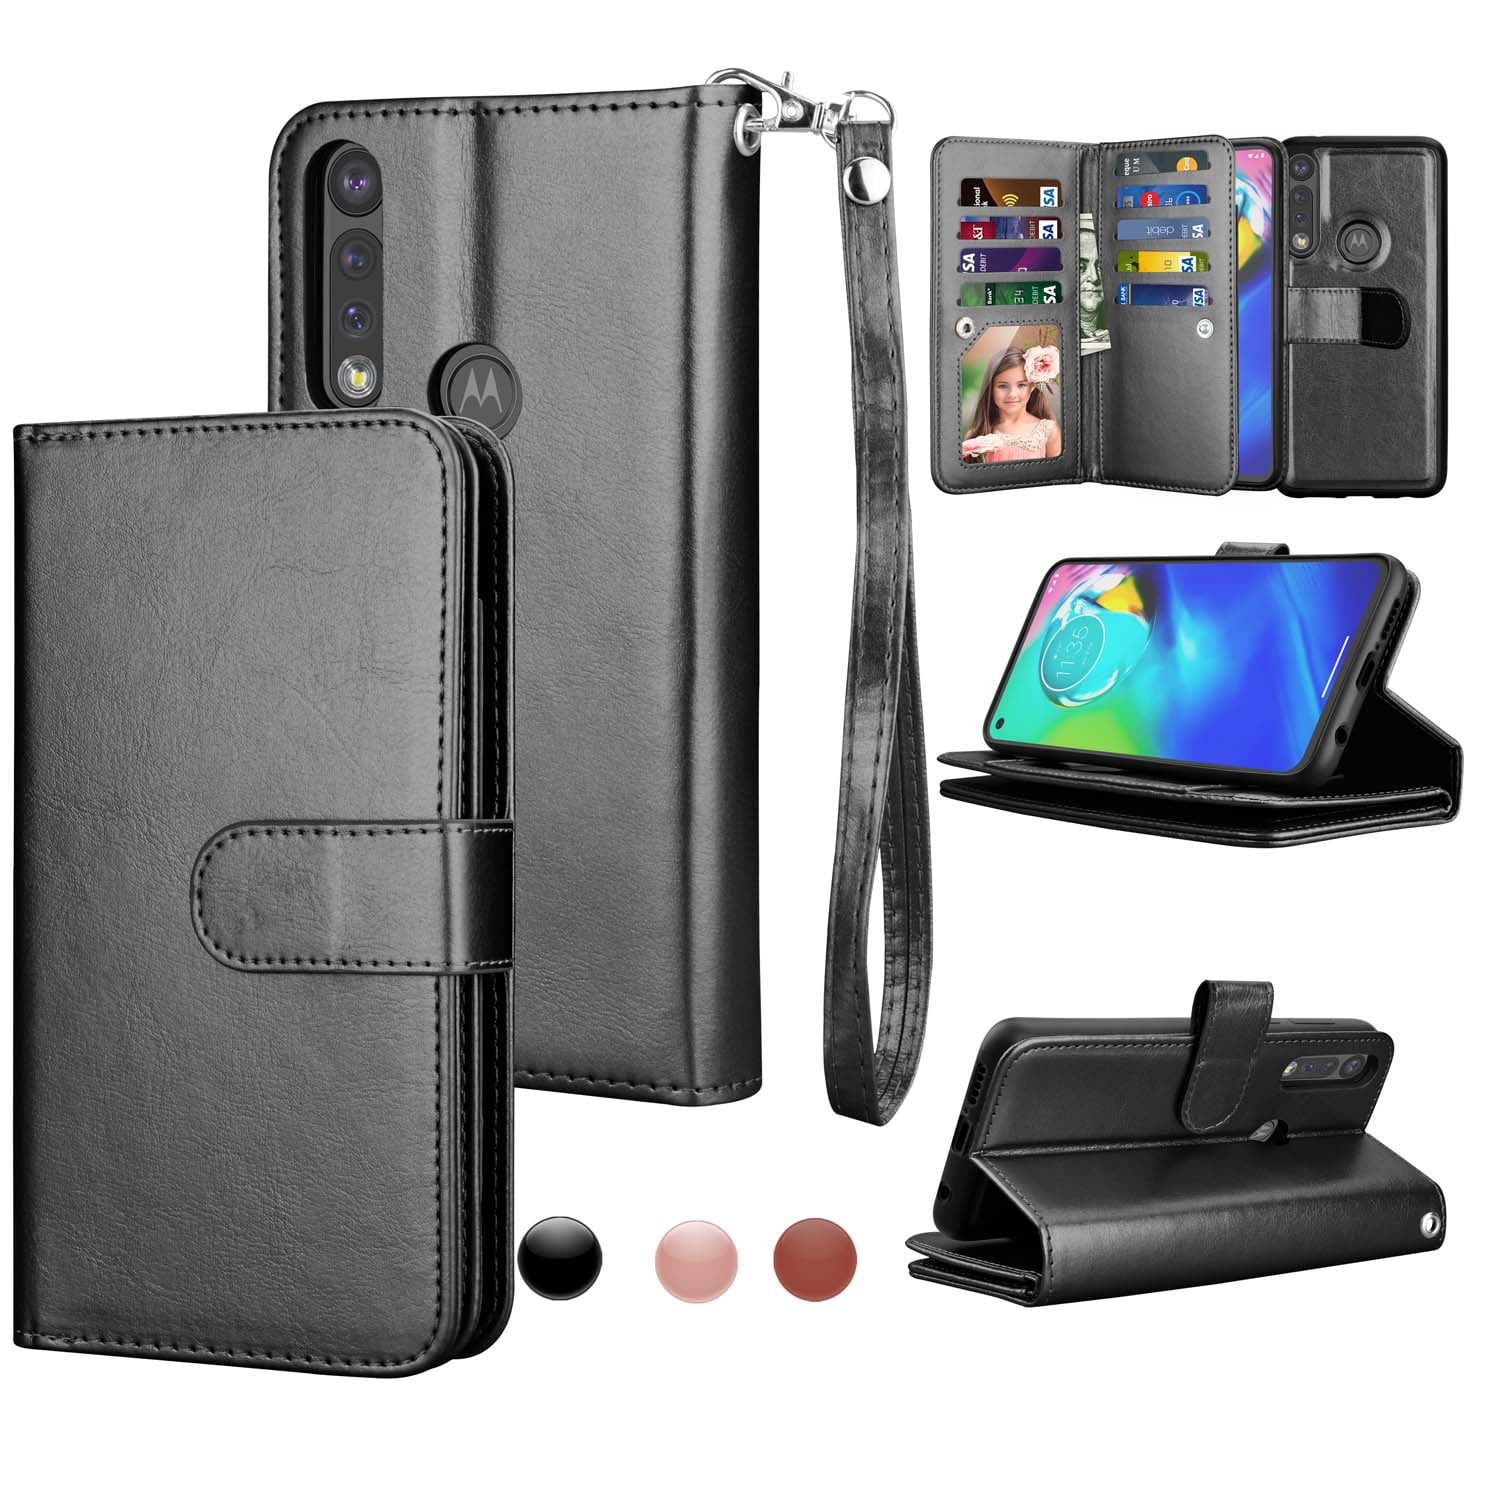 3 Card Slot Gray Stylish Leather Full-Cover Phone Case TANYO Case Suitable for Motorola Moto G8 Power Magnetic Closure and Flip Stand Wallet Case